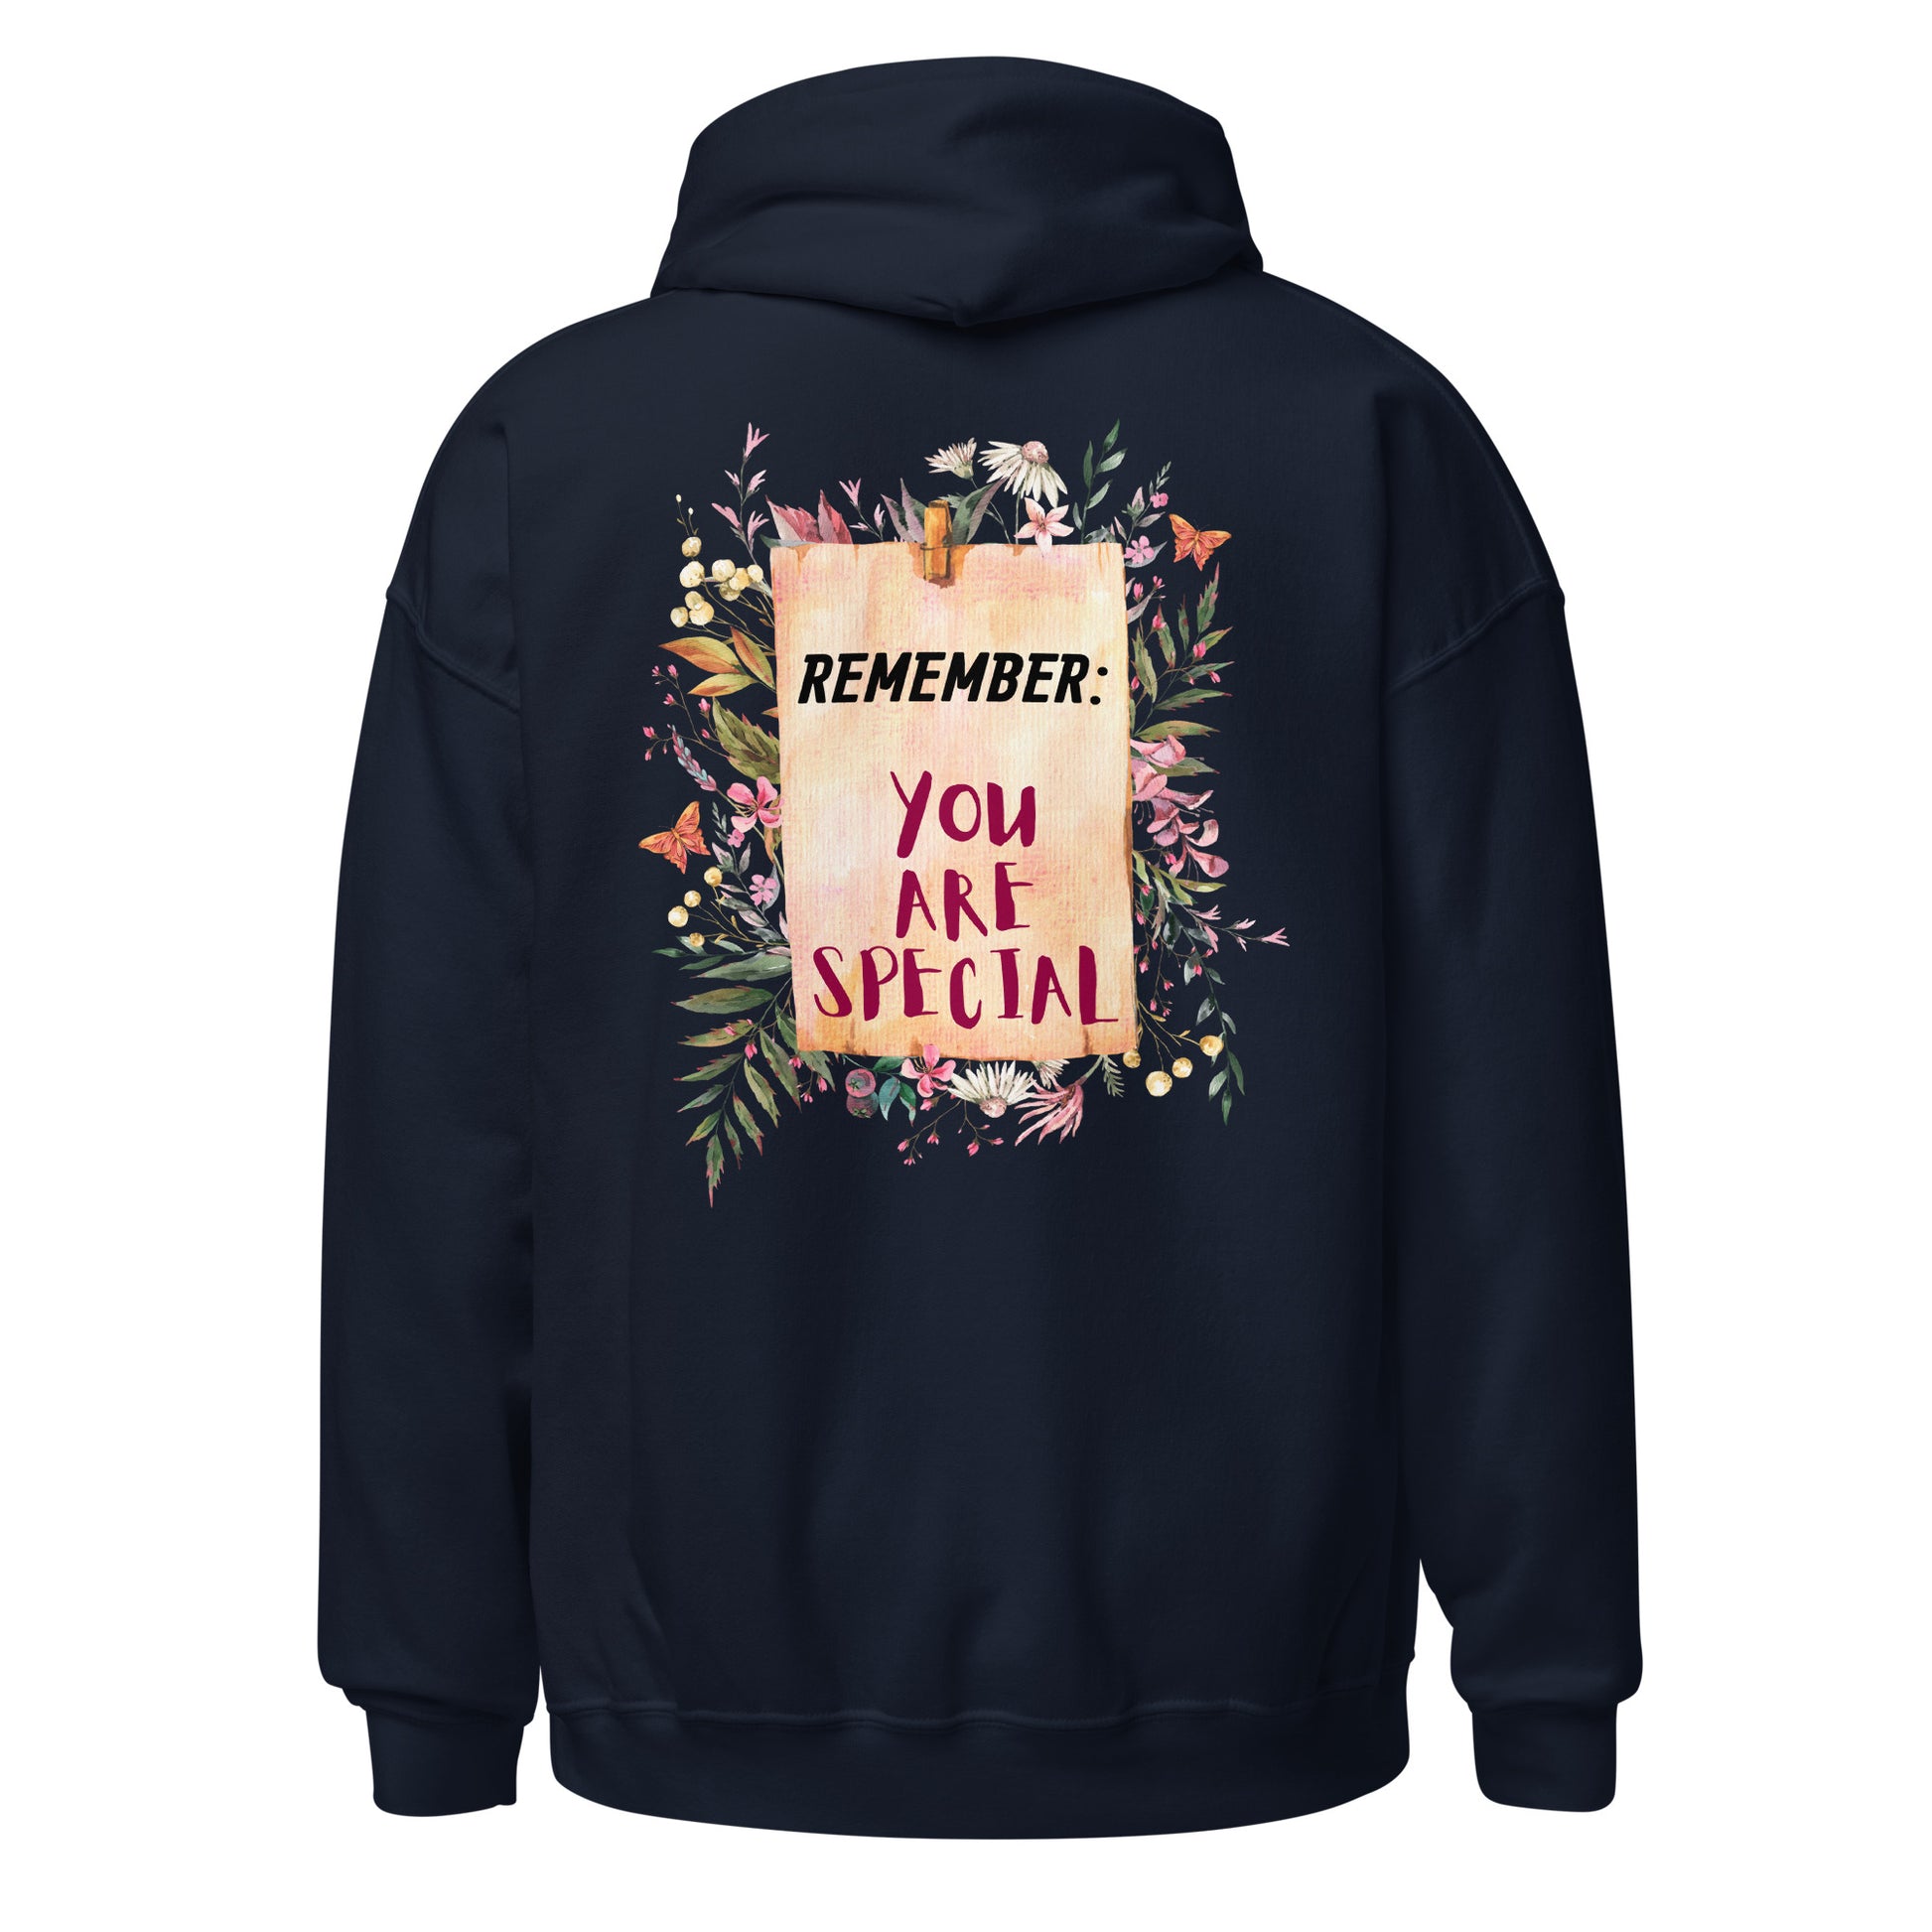 Inspirational Pullover Hoodie featuring the powerful affirmation, "Remember: You Are Special." The vintage-inspired design, featuring a floral botanical reminder note, adds a touch of timeless elegance to their attire. Navy hoodie